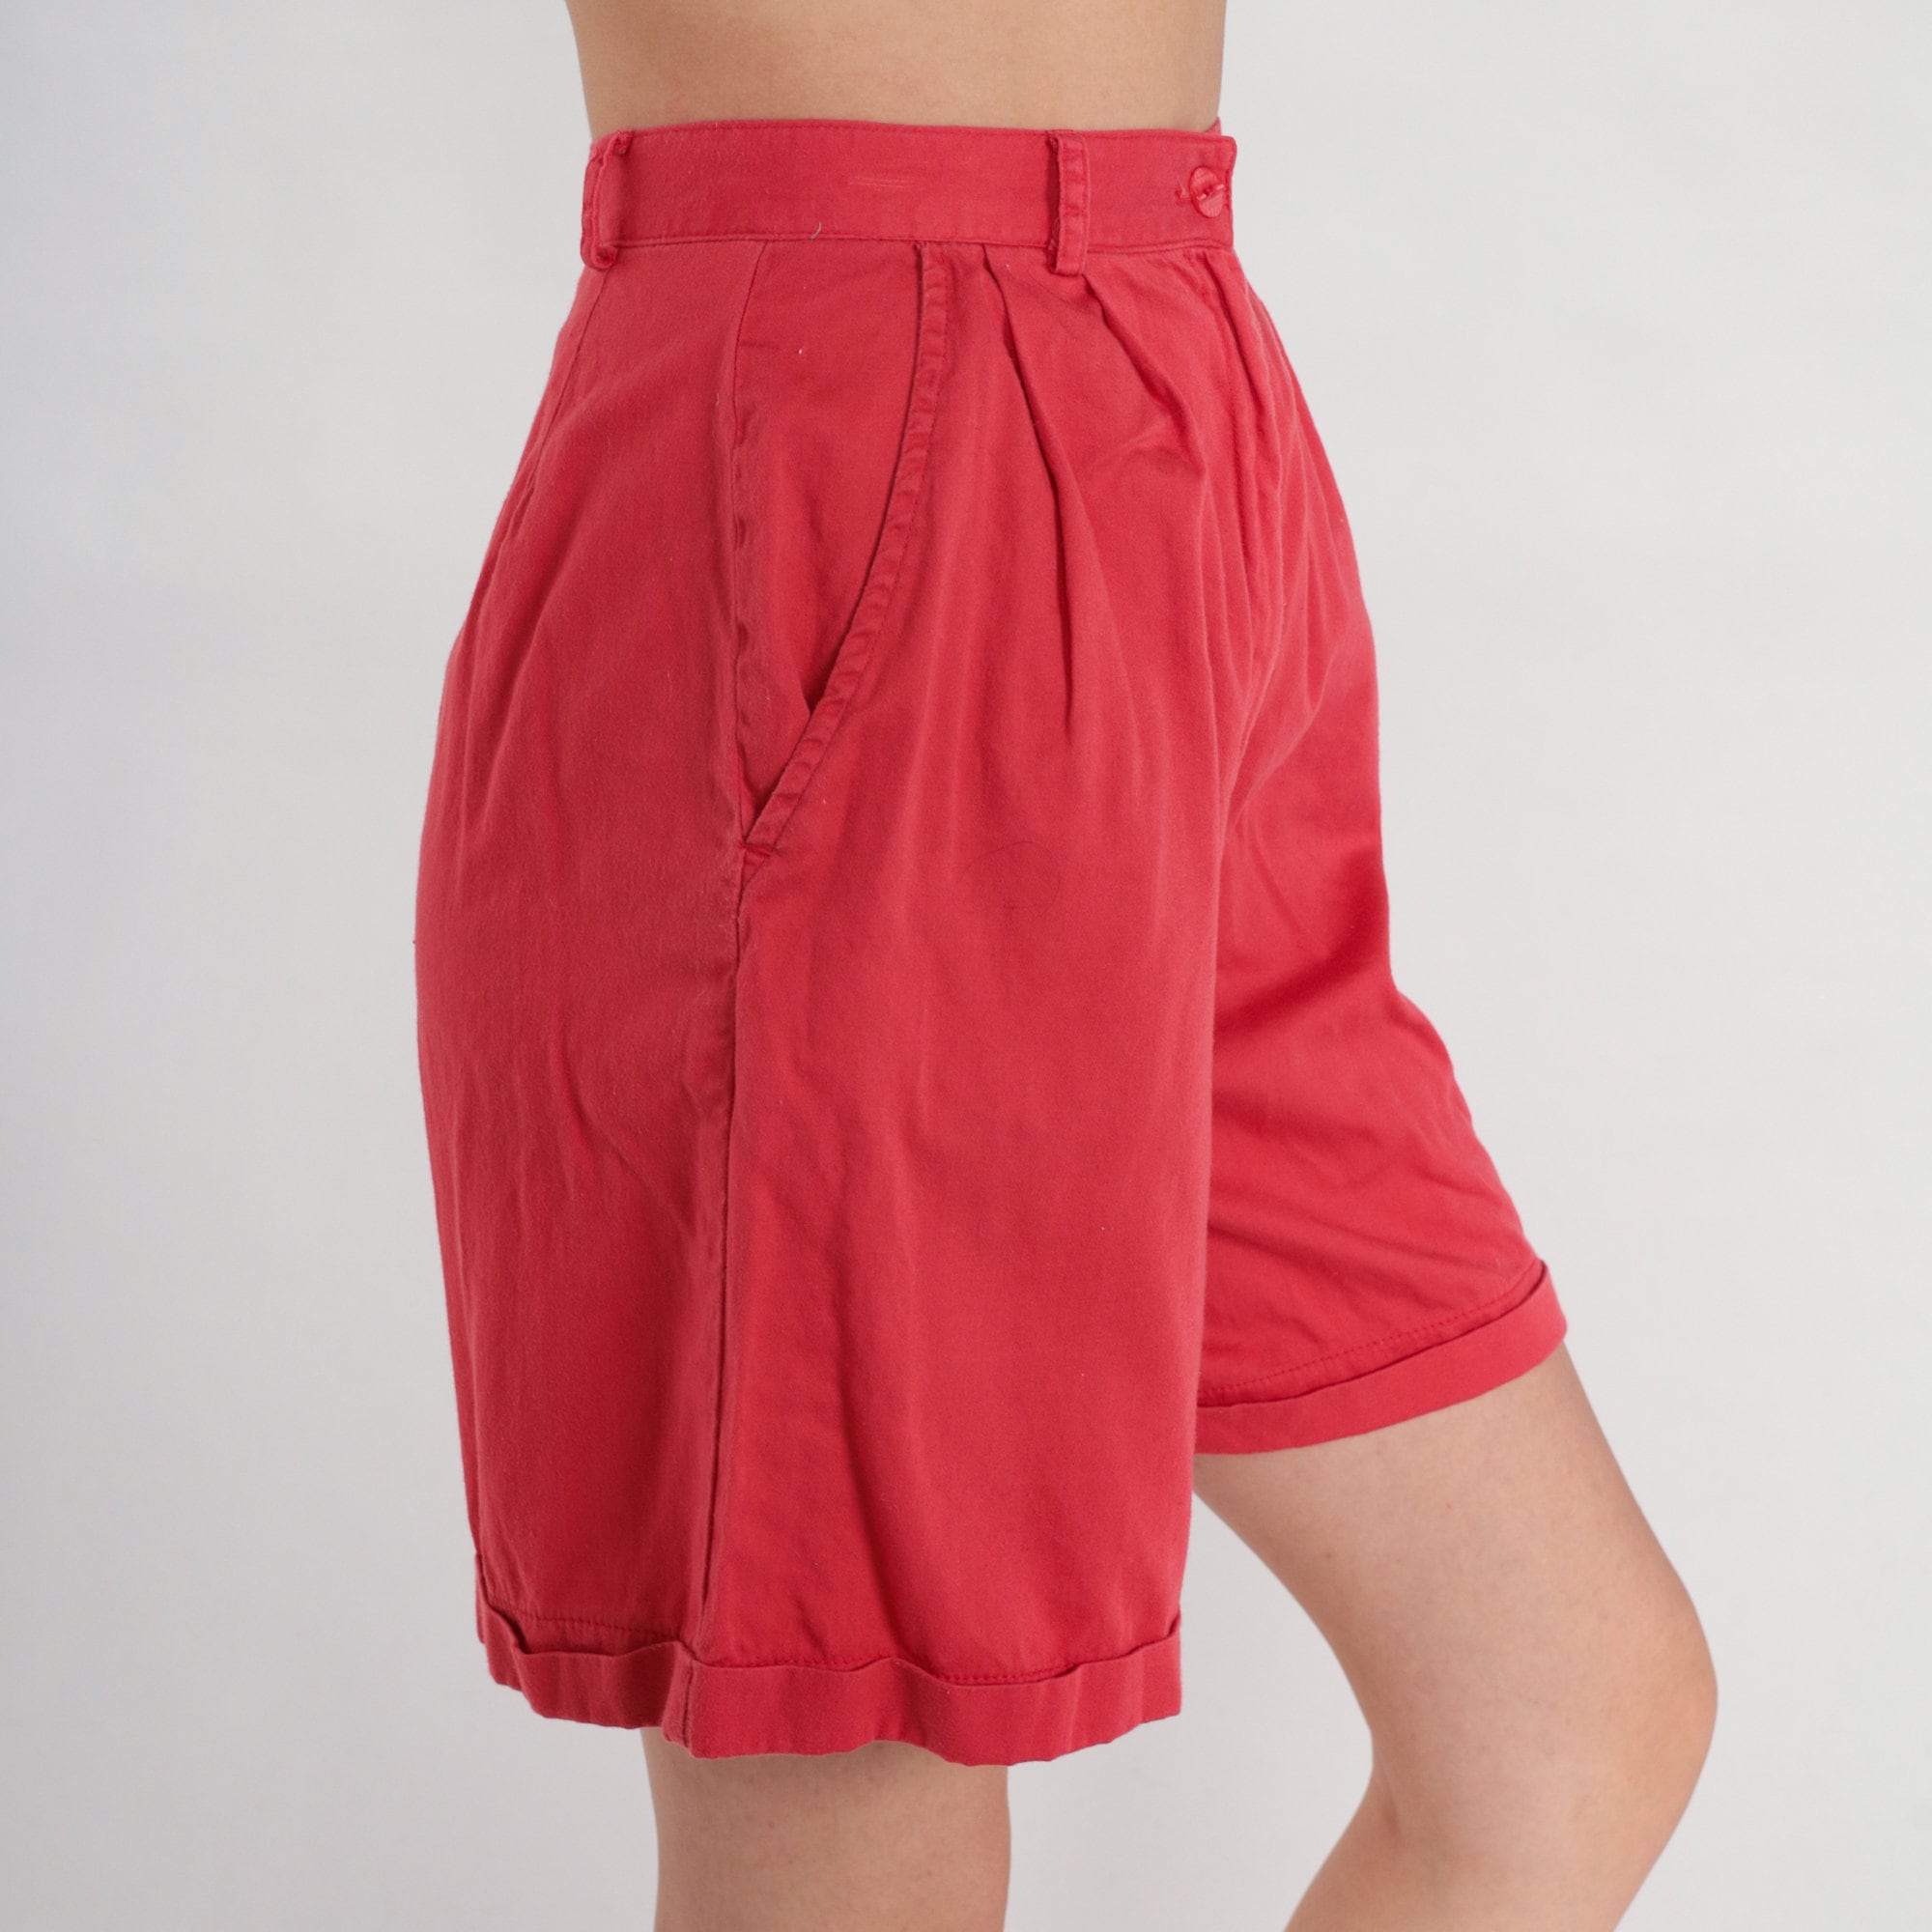 Red Pleated Shorts 80s High Waisted Mom Shorts Pleated Cotton Mid ...